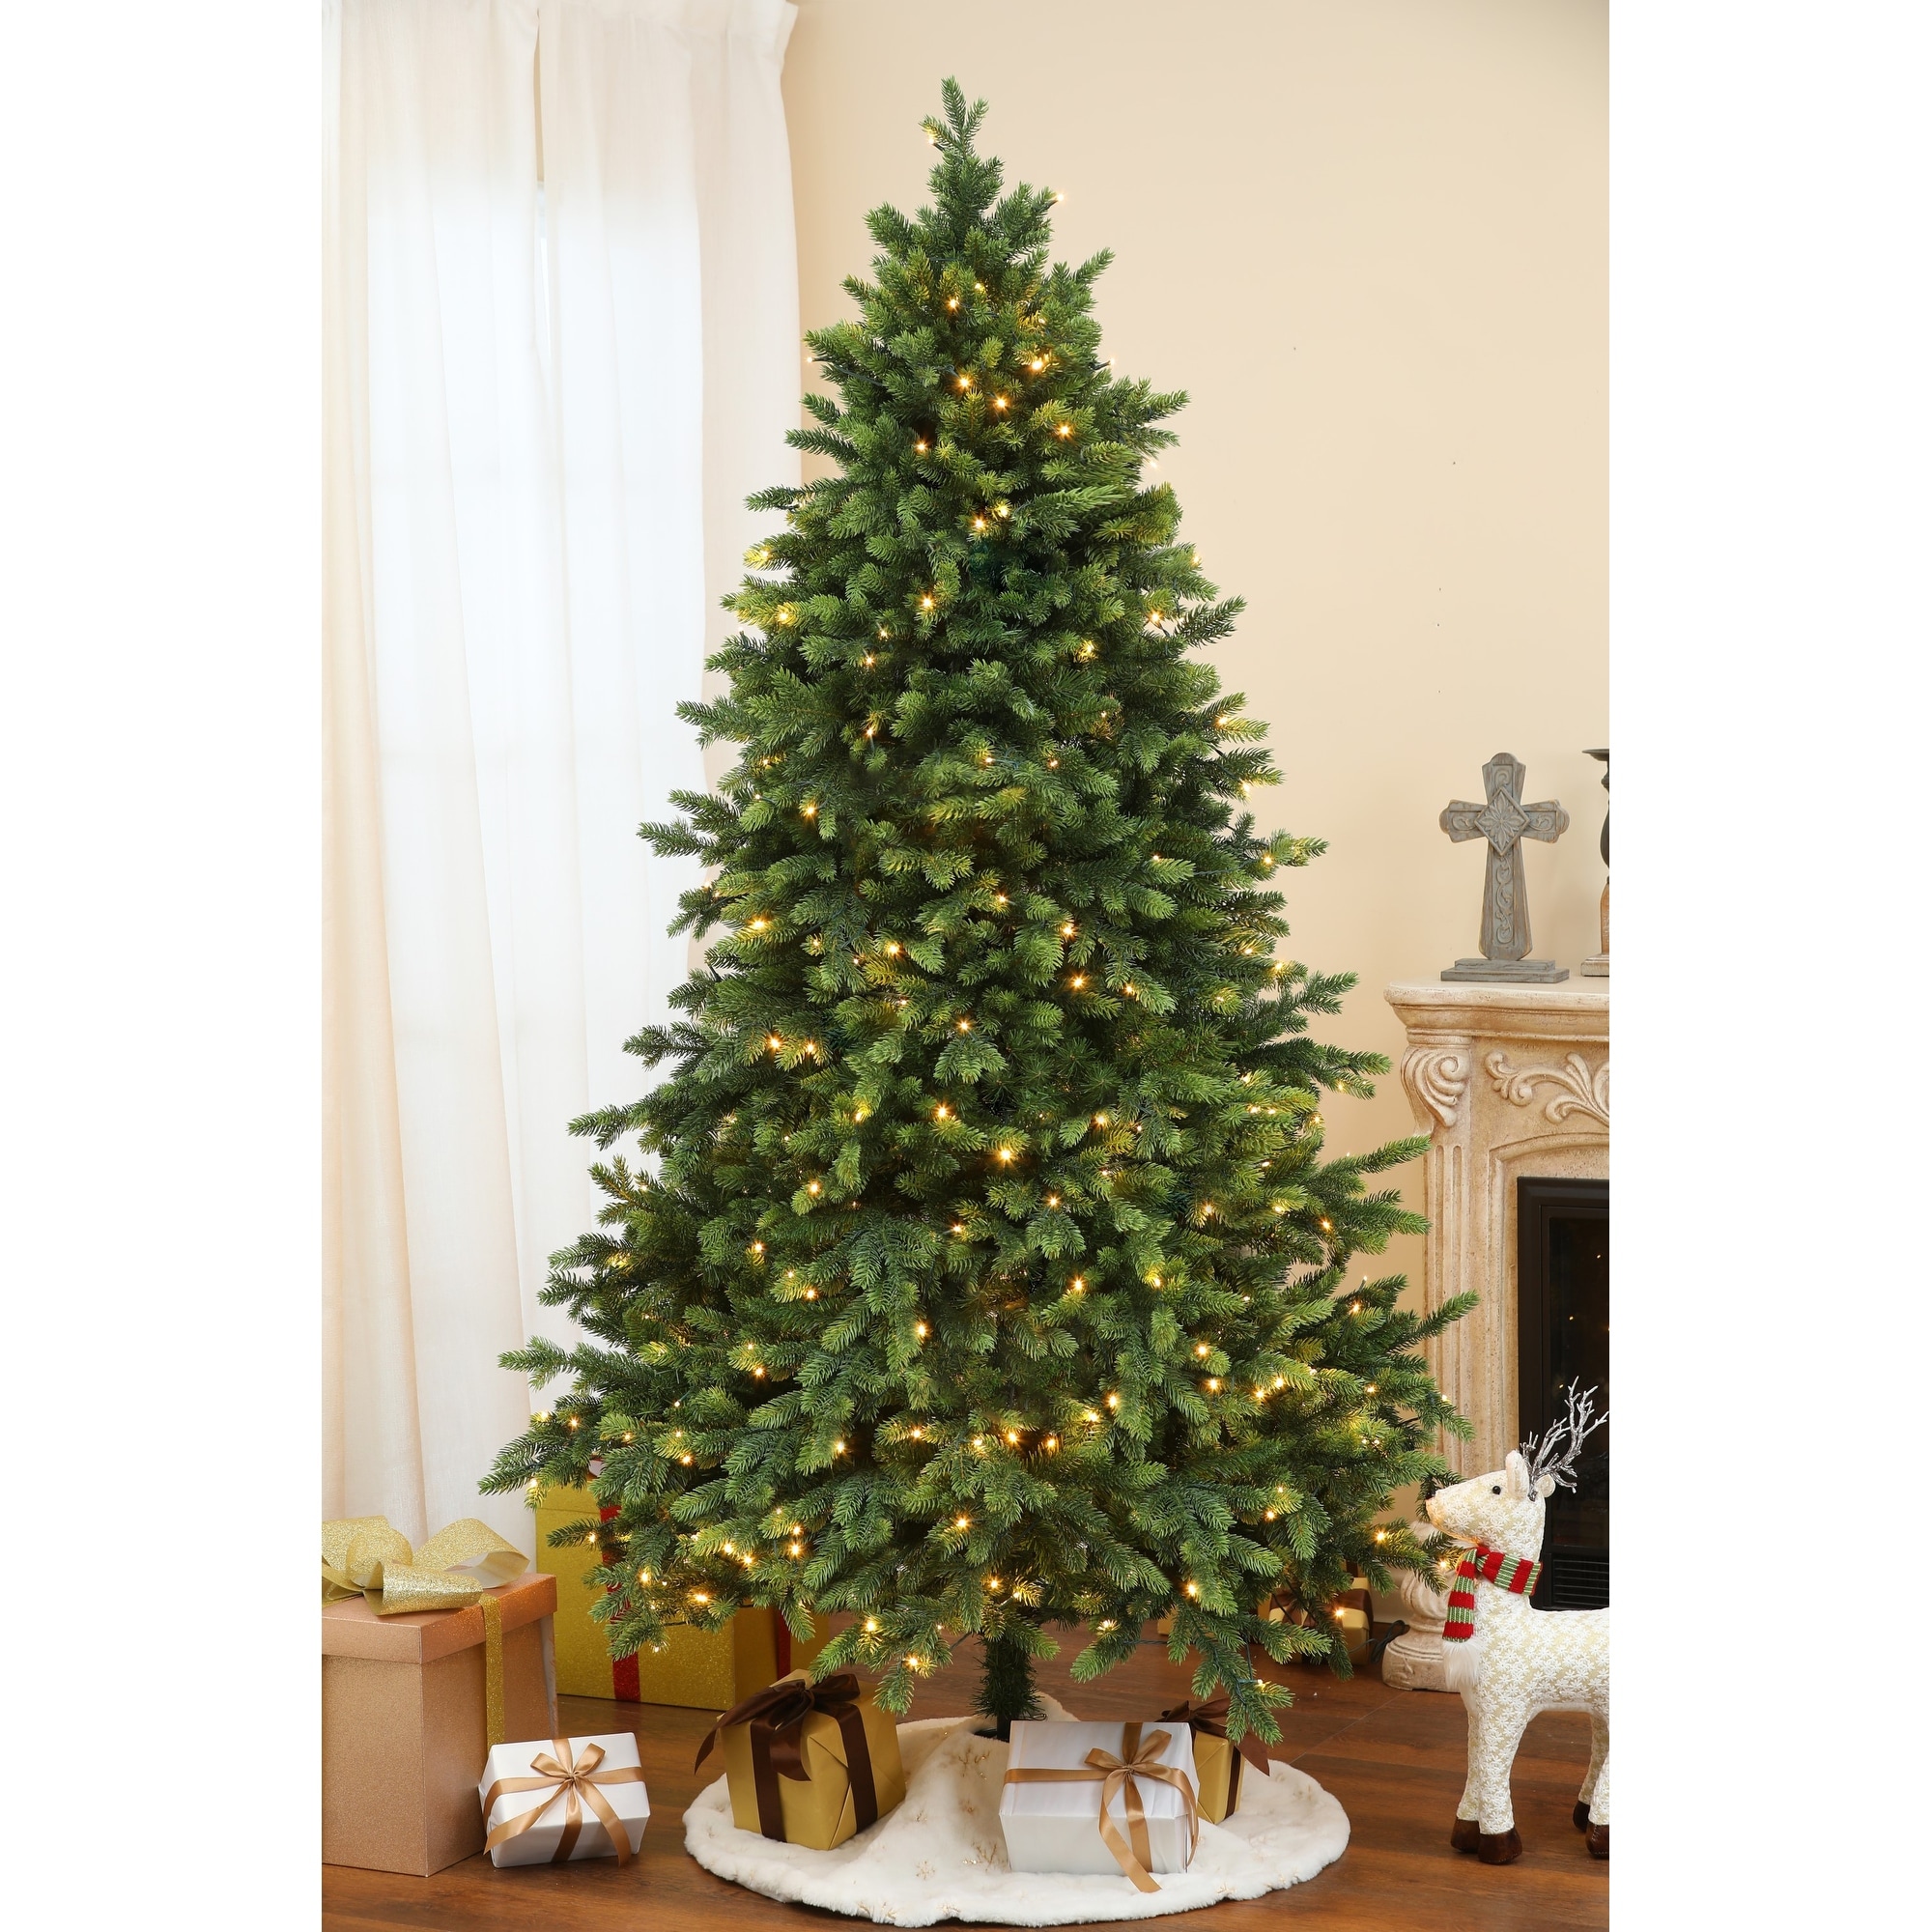 Maypex 7 ft. Green Spruce Lighted Artificial Christmas Tree